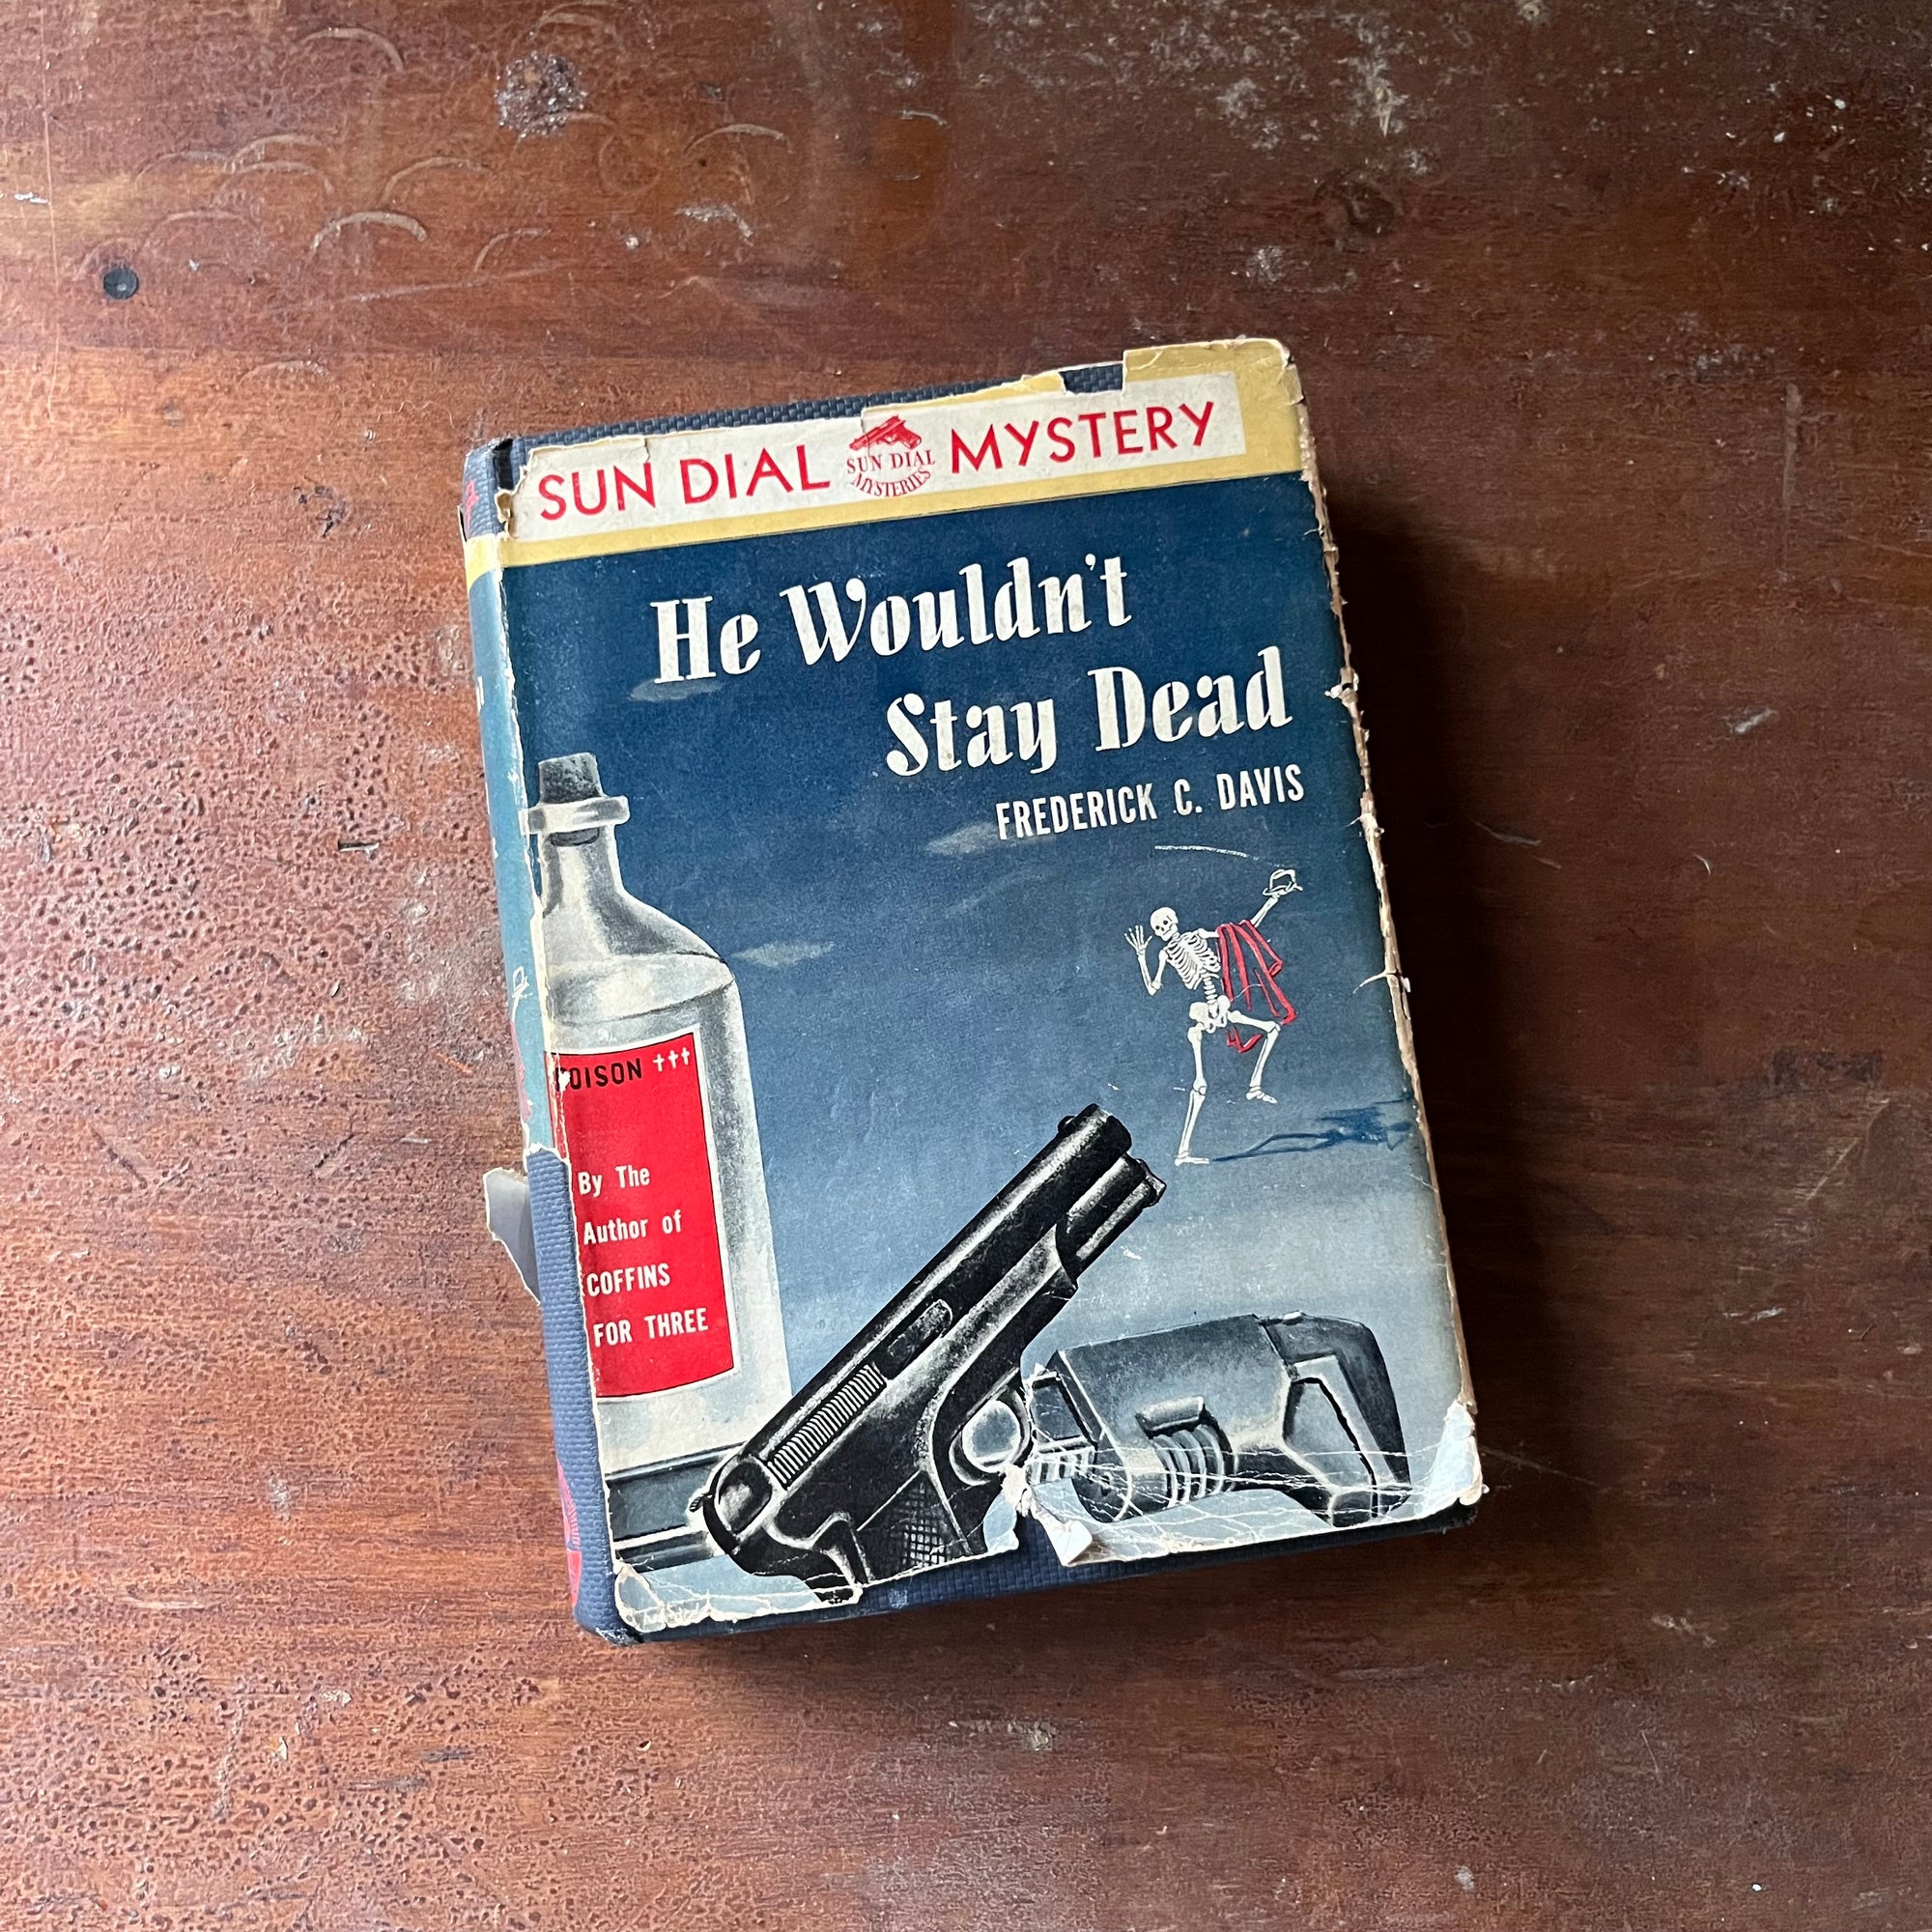 A Sundial Mystery, vintage mystery novel  - He Wouldn't Stay Dead written by Frederick C. Davis - view of the dust jacket's front cover with an illustration of a pistol, a bottle of poison & a dancing skeleton waving